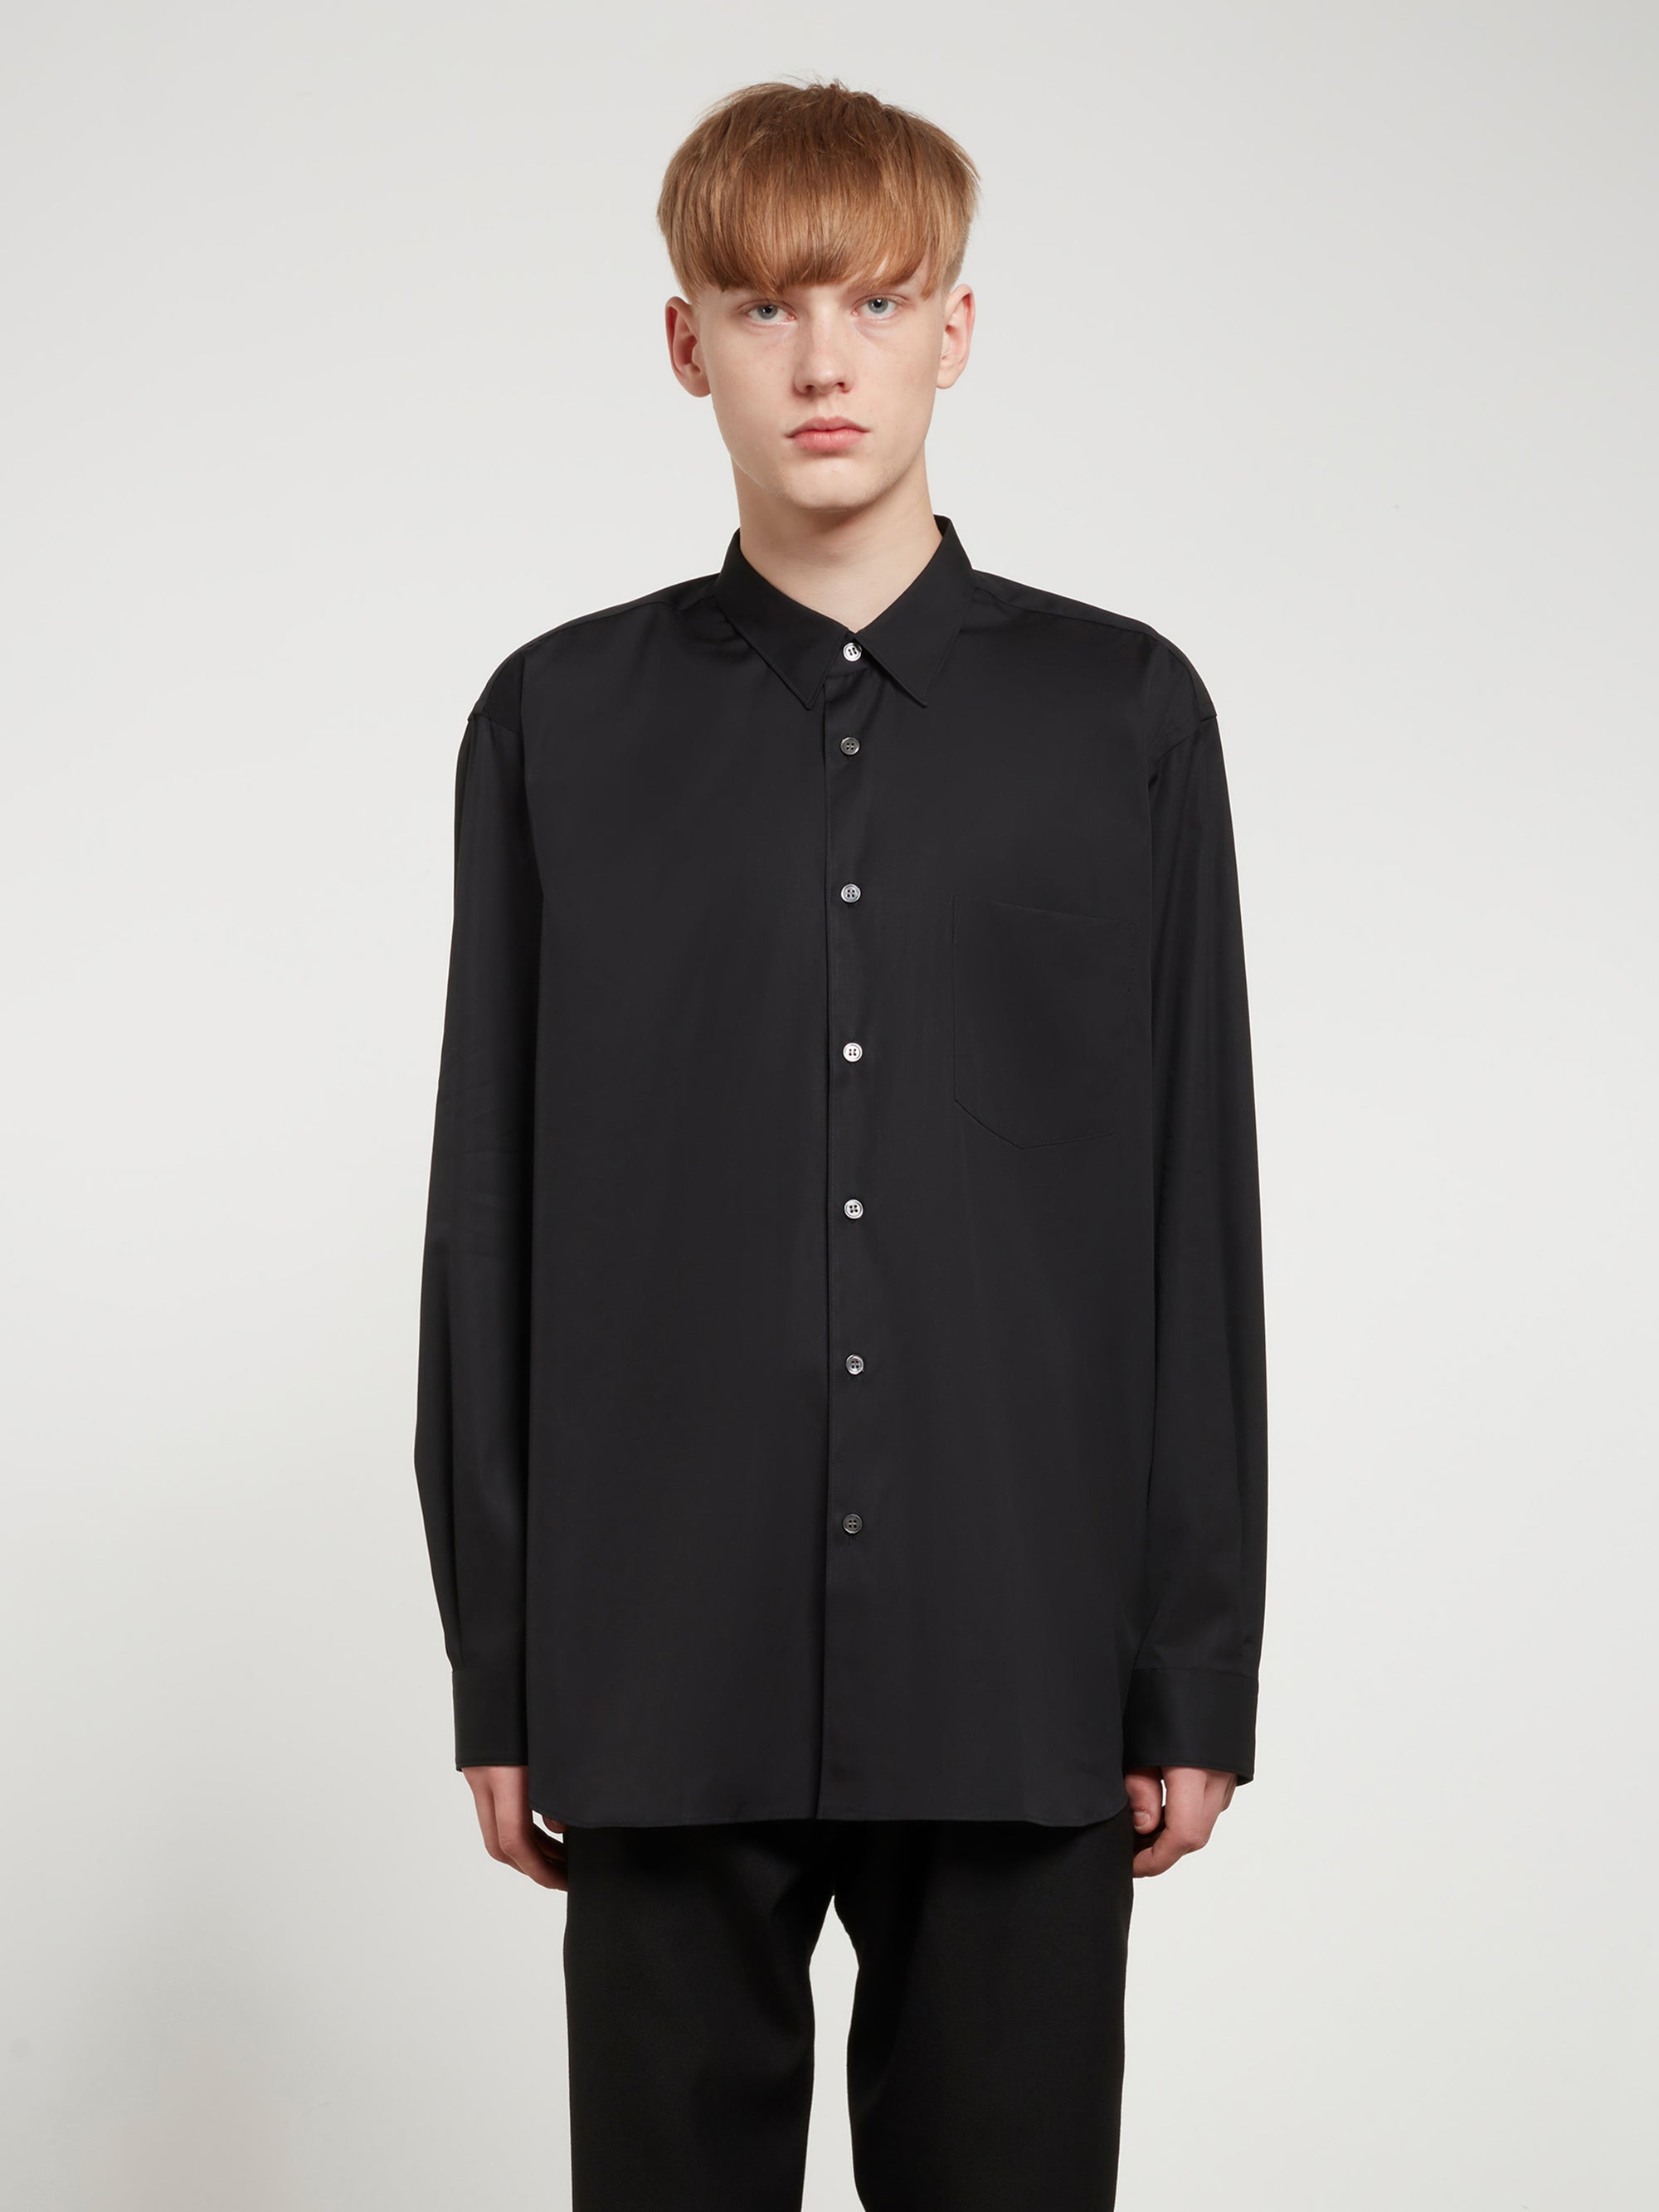 CDG Shirt Forever - Wide Fit Cotton Shirt - (Black) view 2